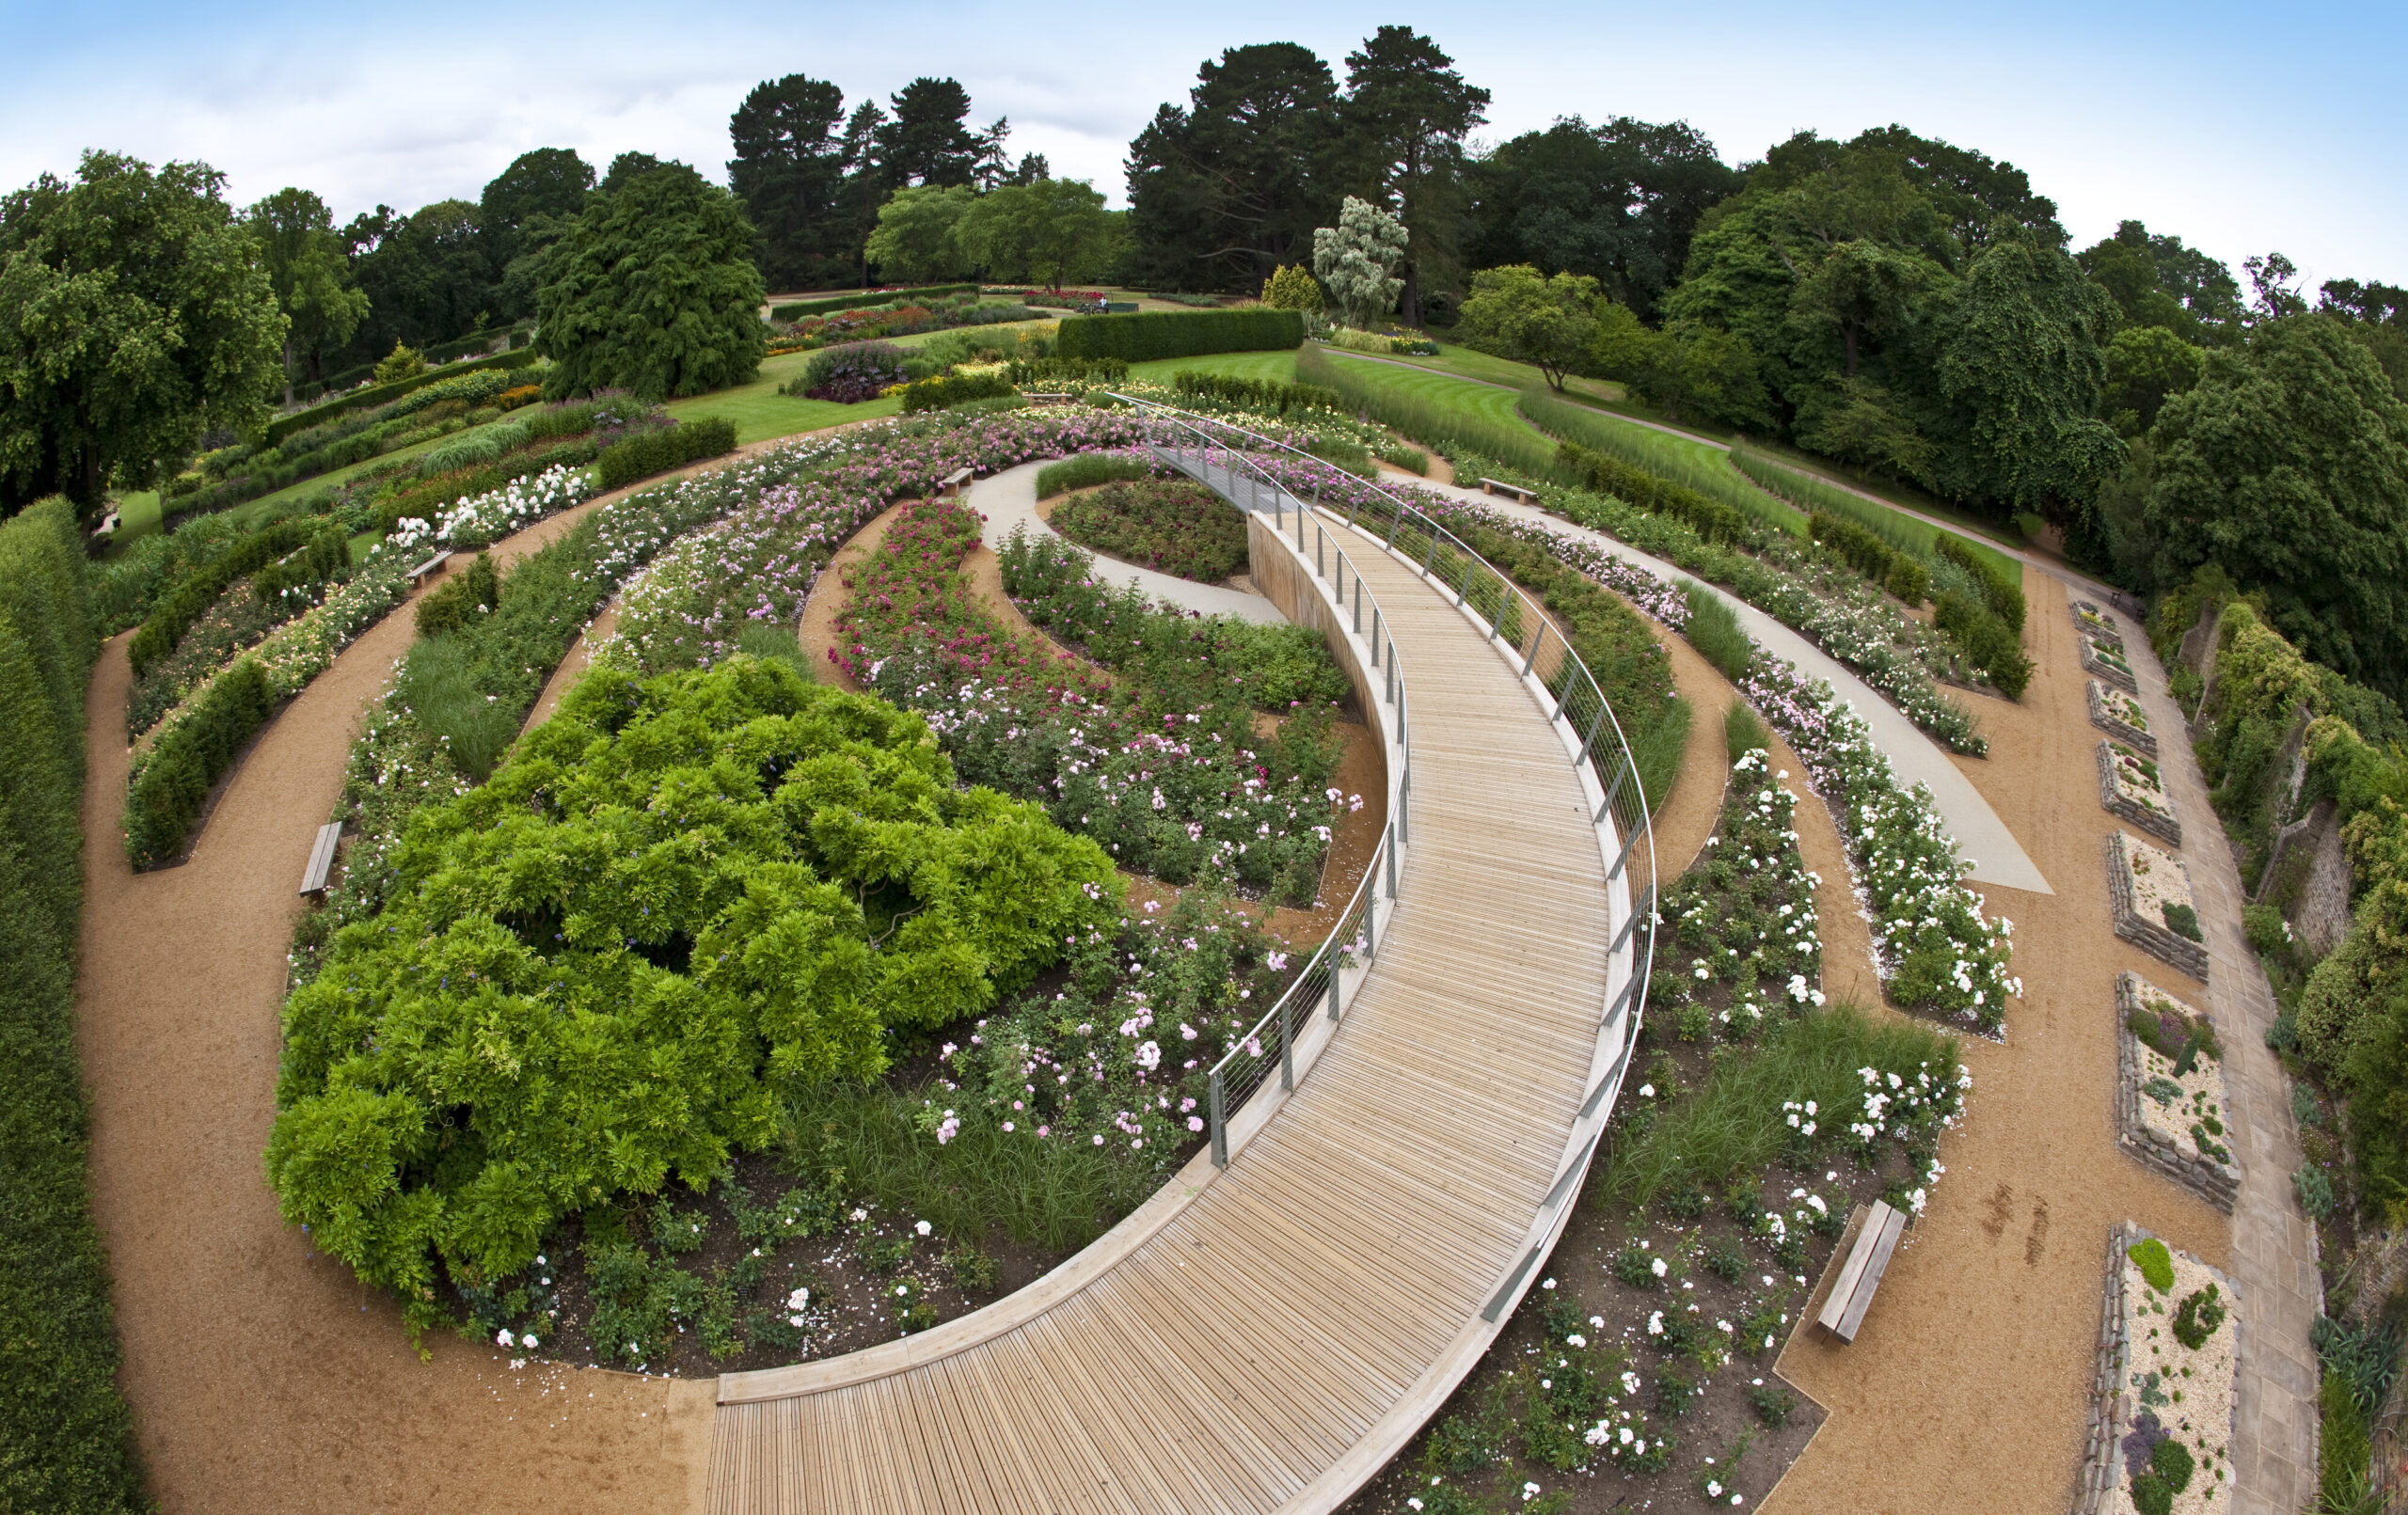 An aerial view of The Rose Garden.